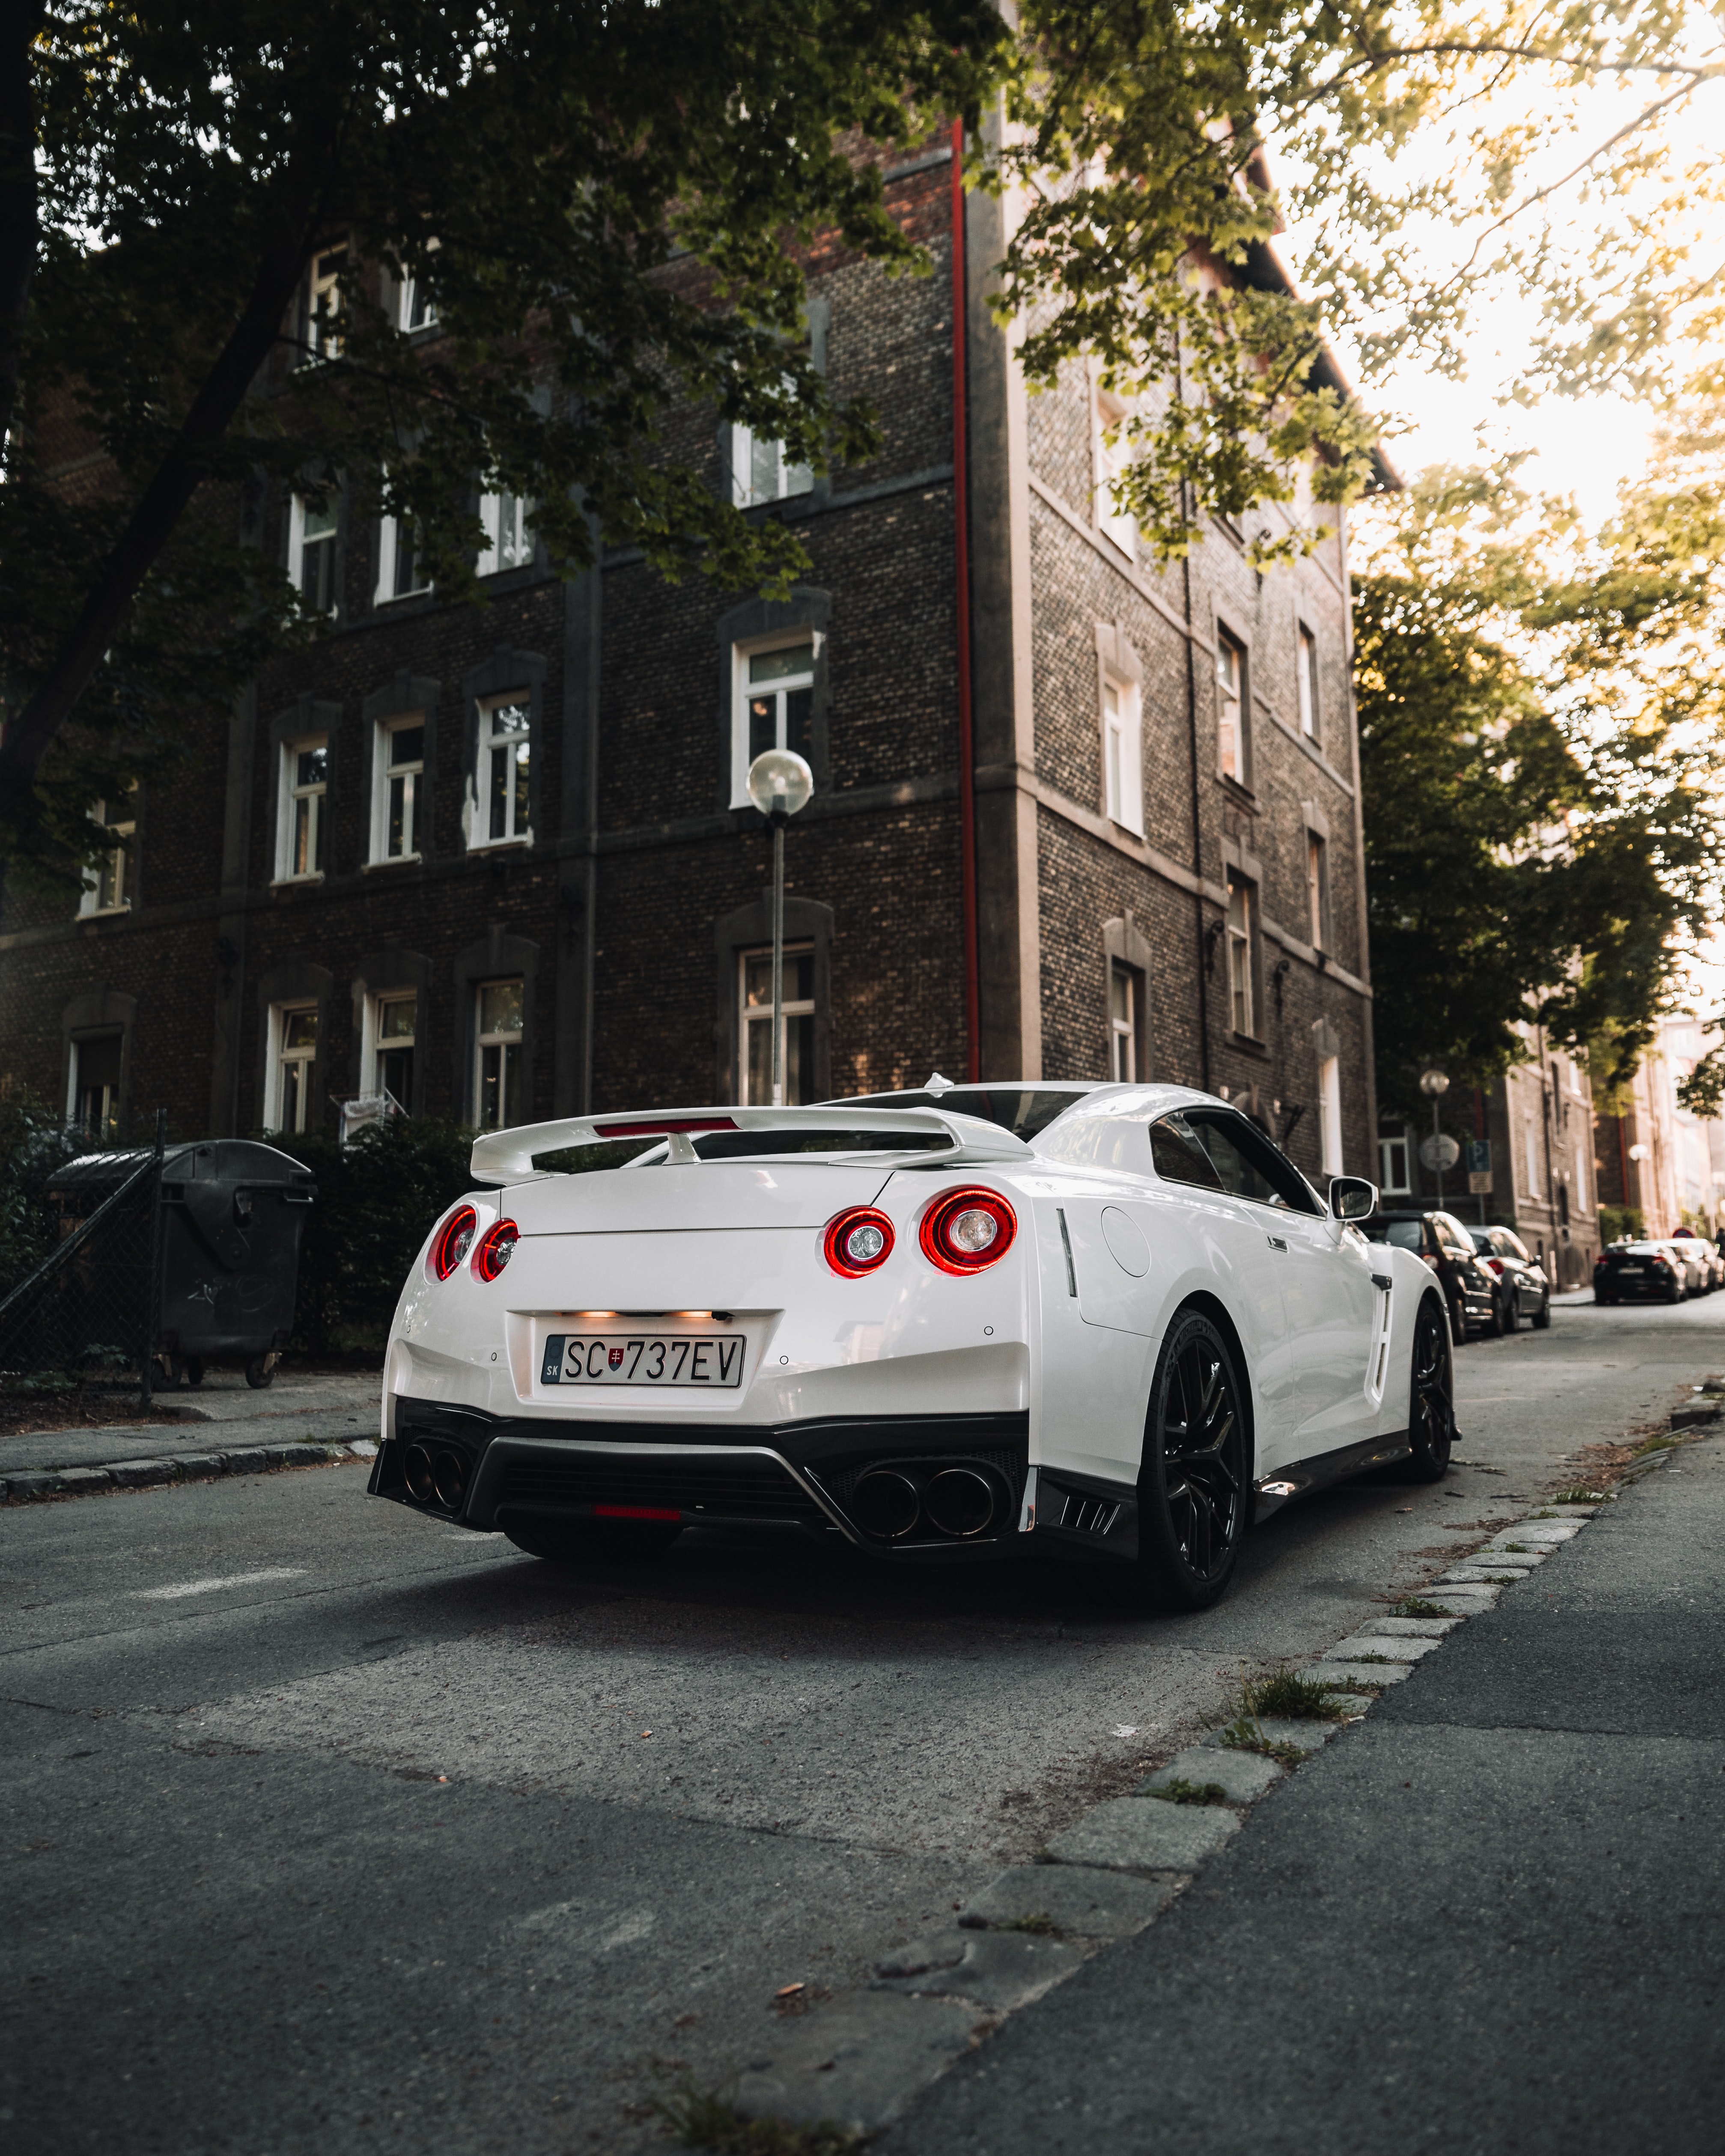 nissan gt-r, sports, sports car, nissan, cars, car, back view, rear view images